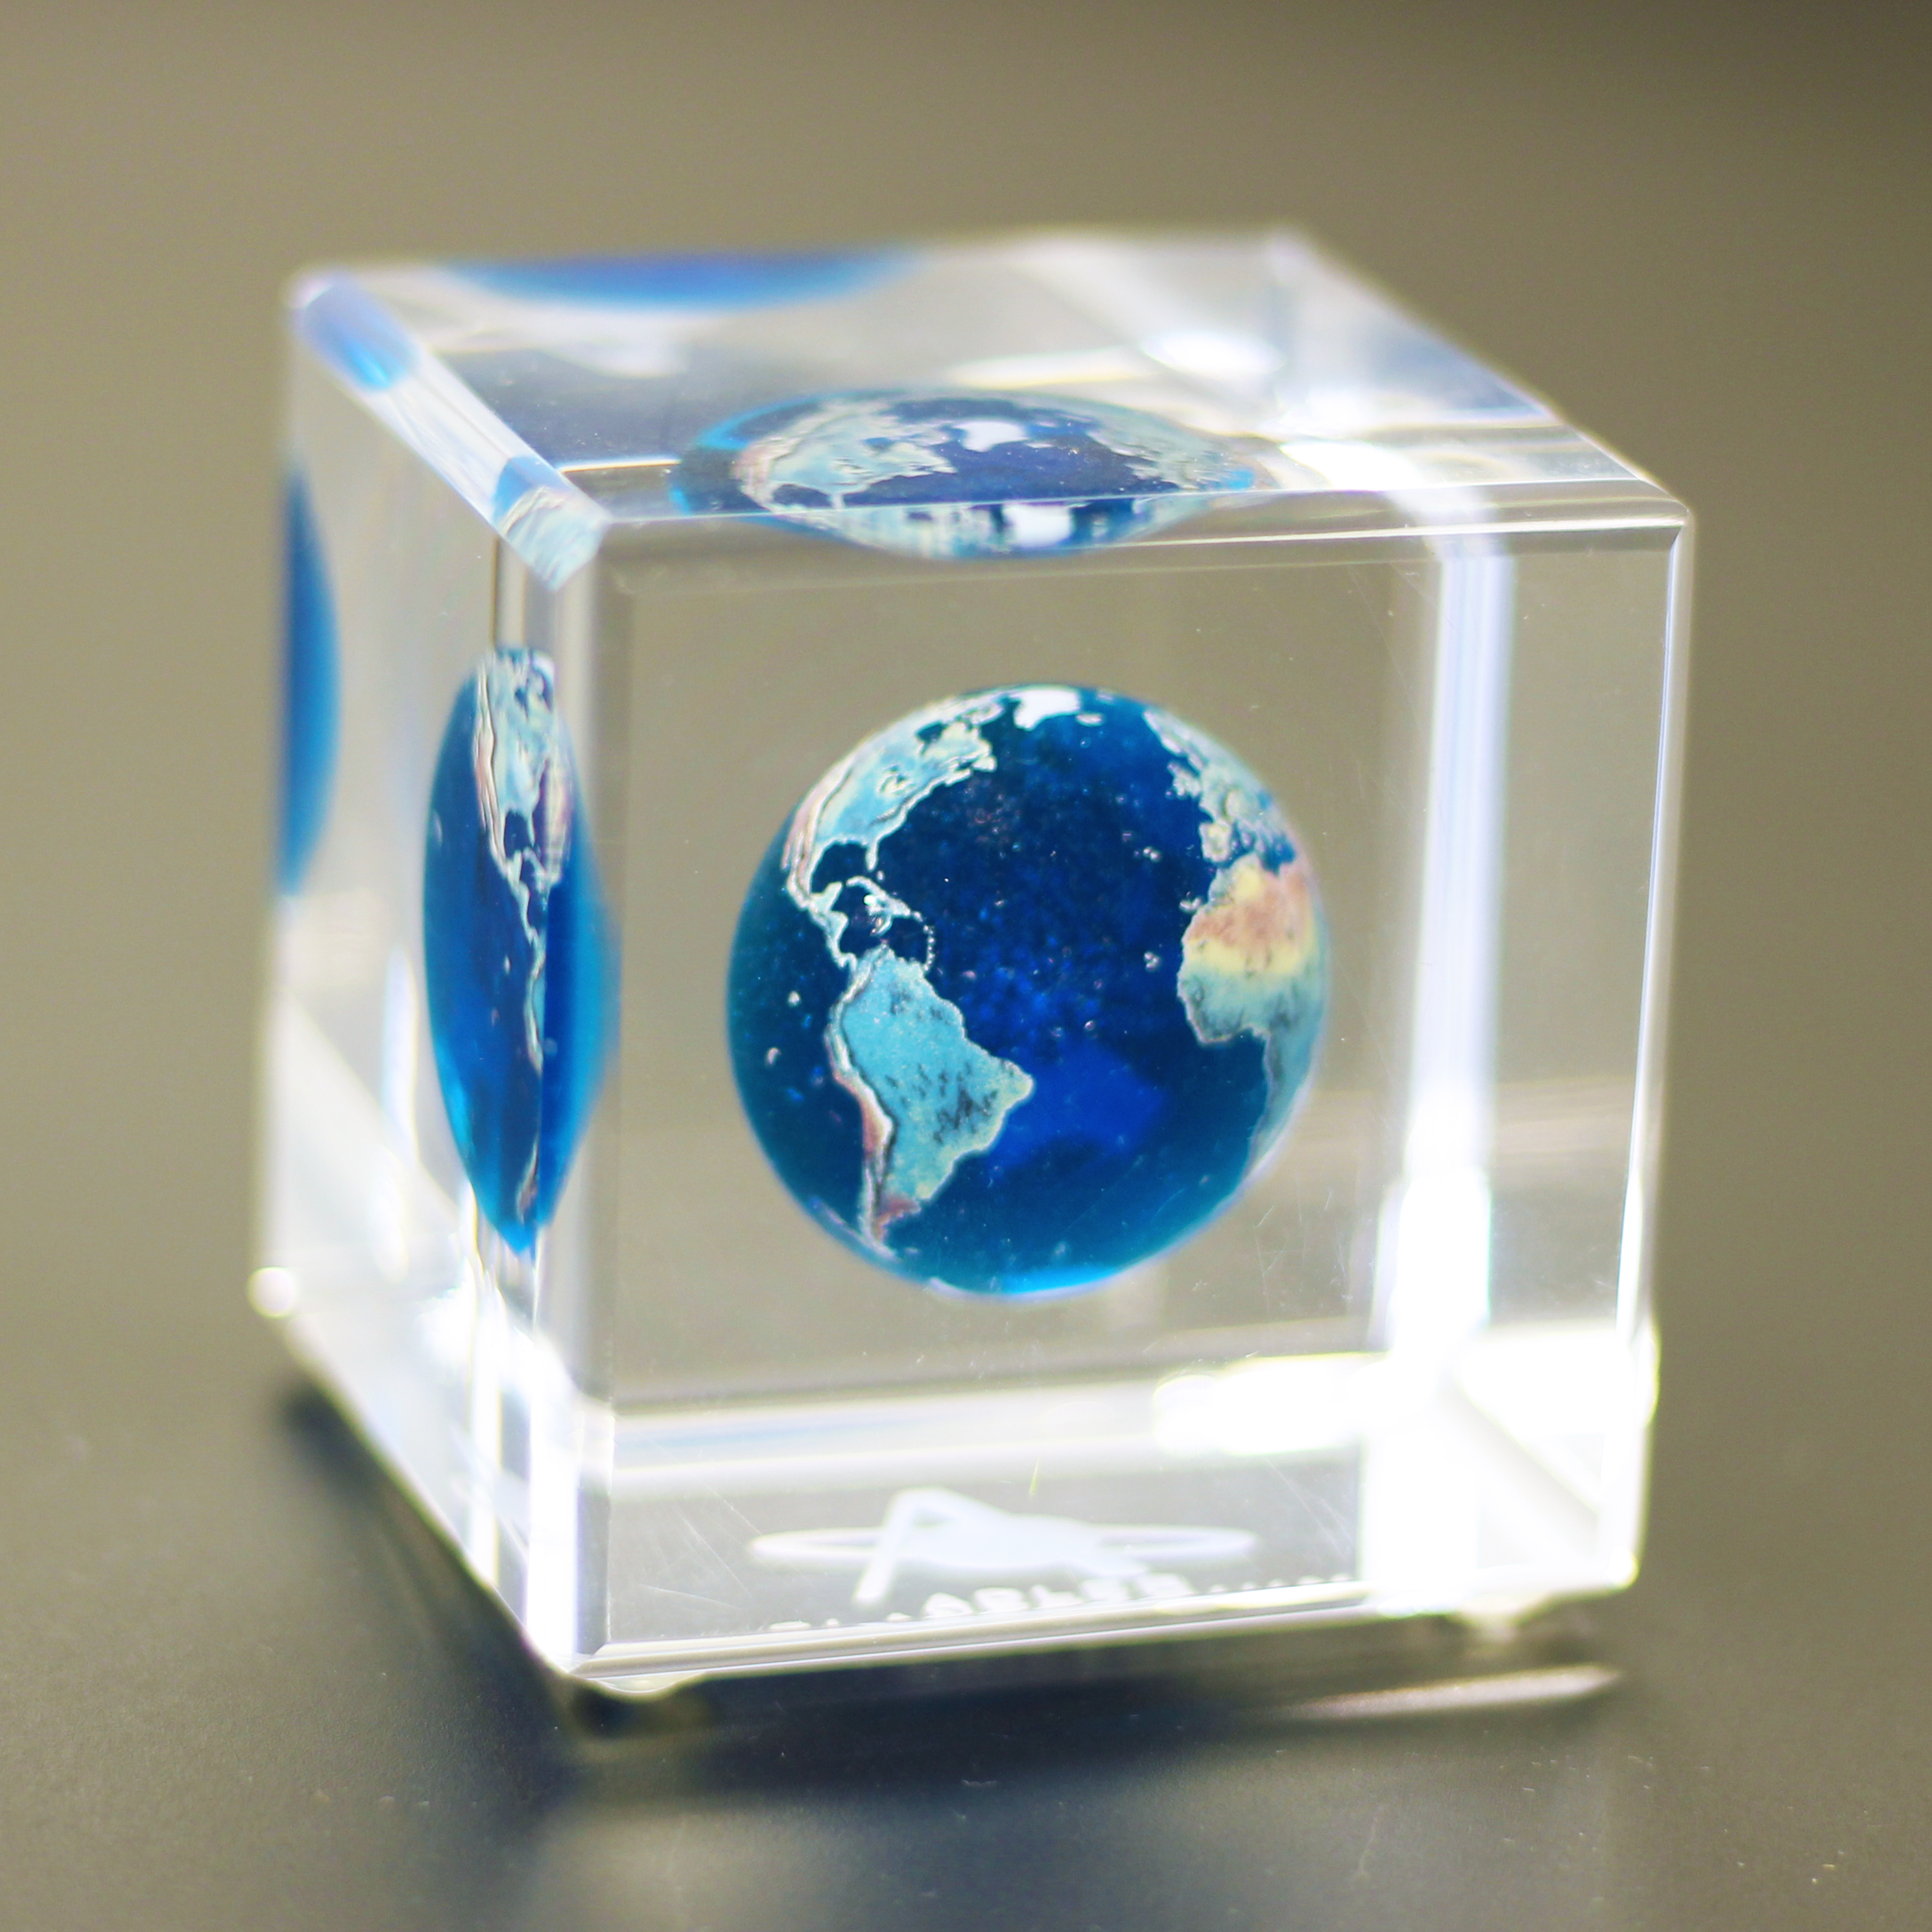 Lucite cube embedment 3 dimensional Earth display award and gift